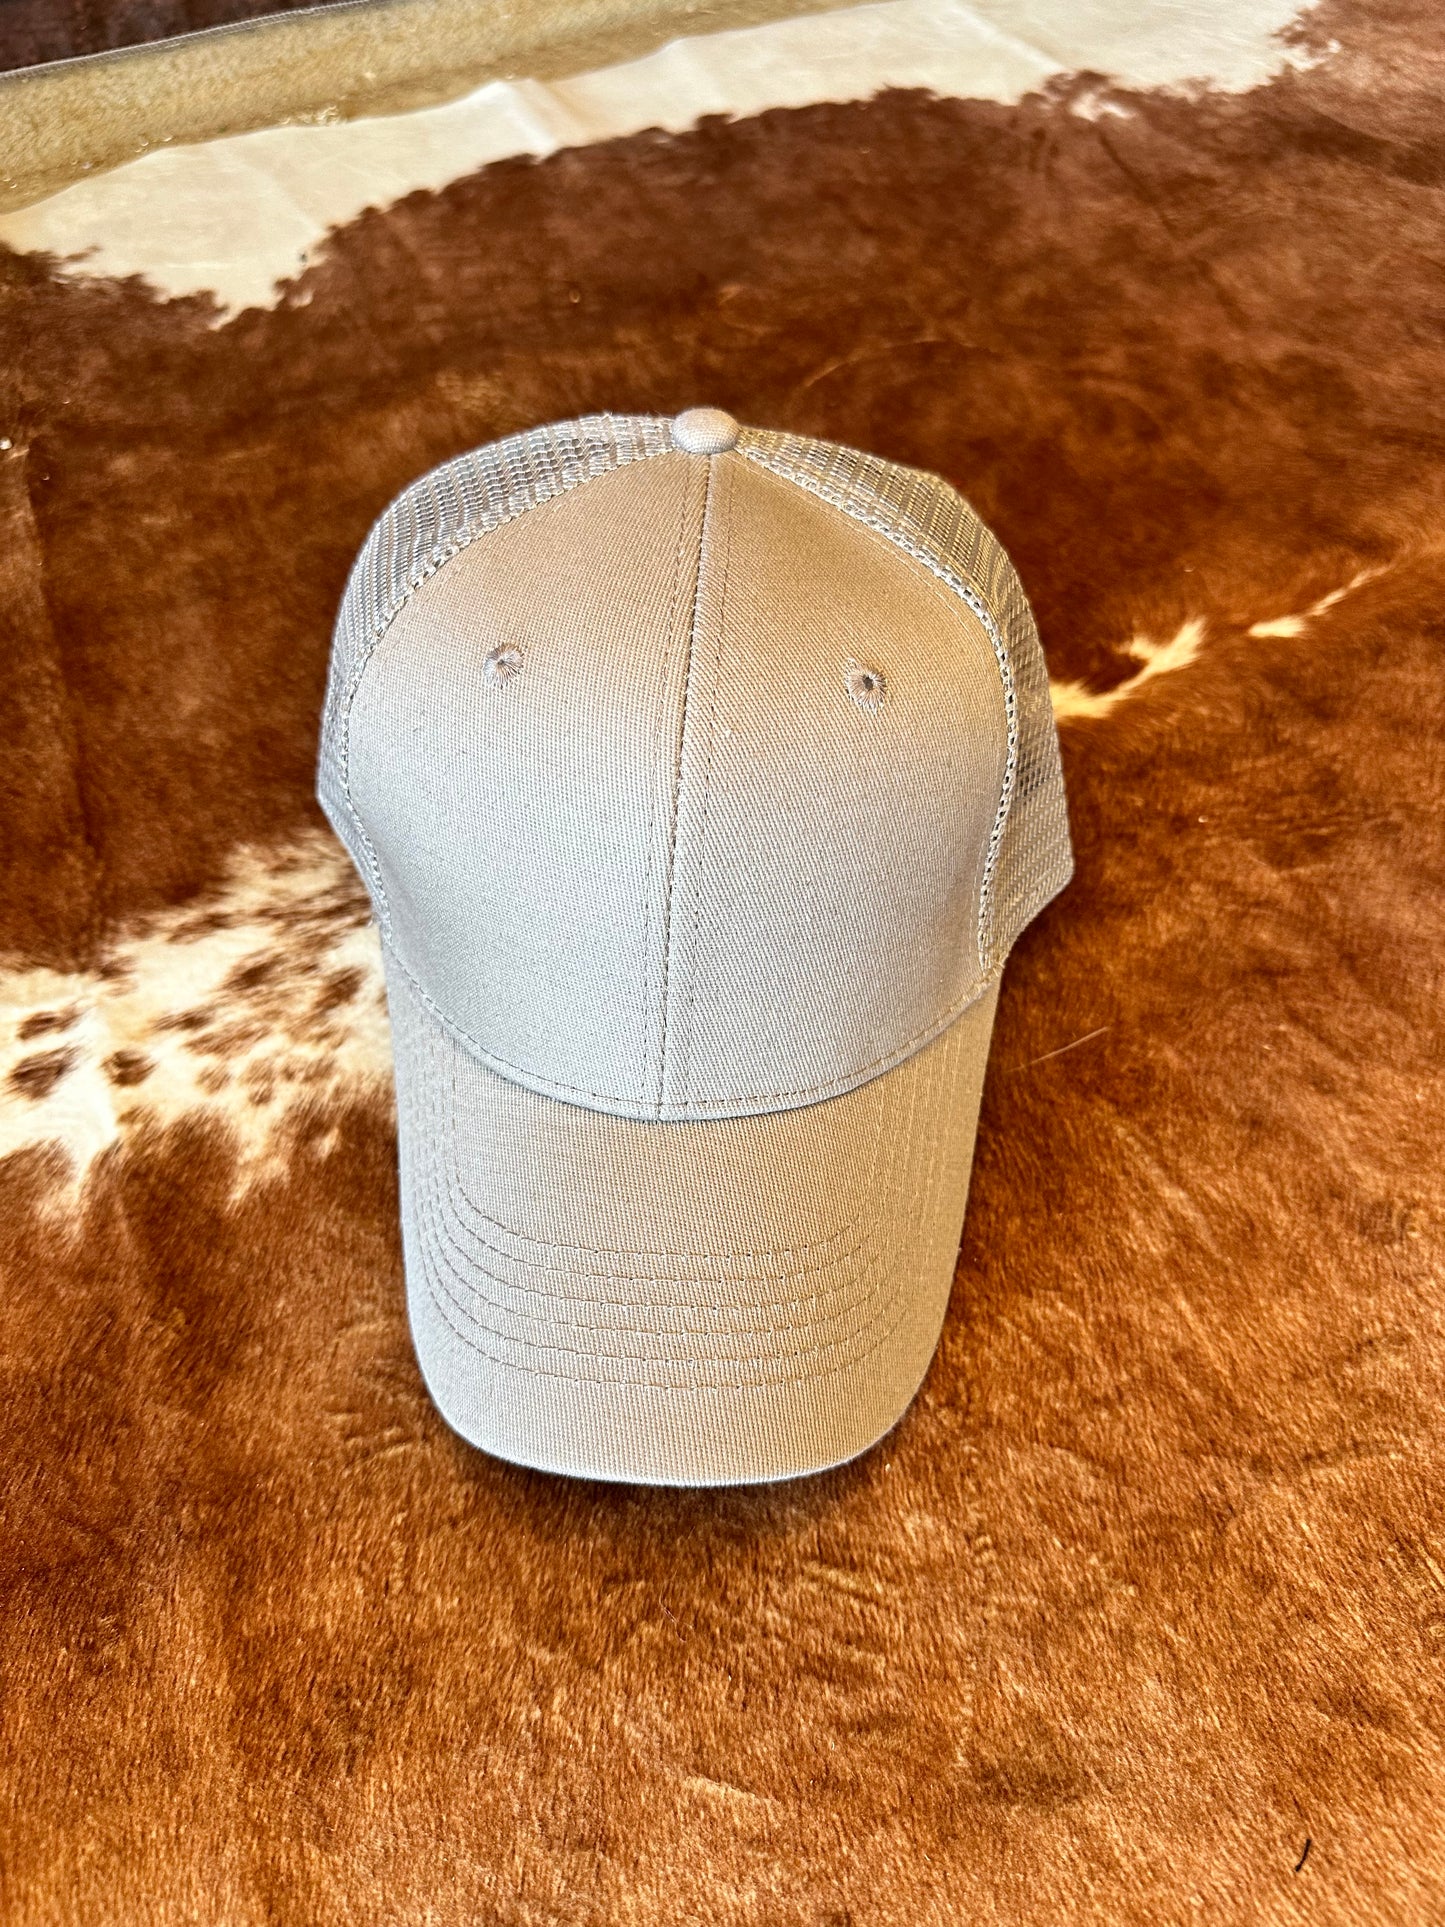 Light grey ball cap with structured crown and mesh back